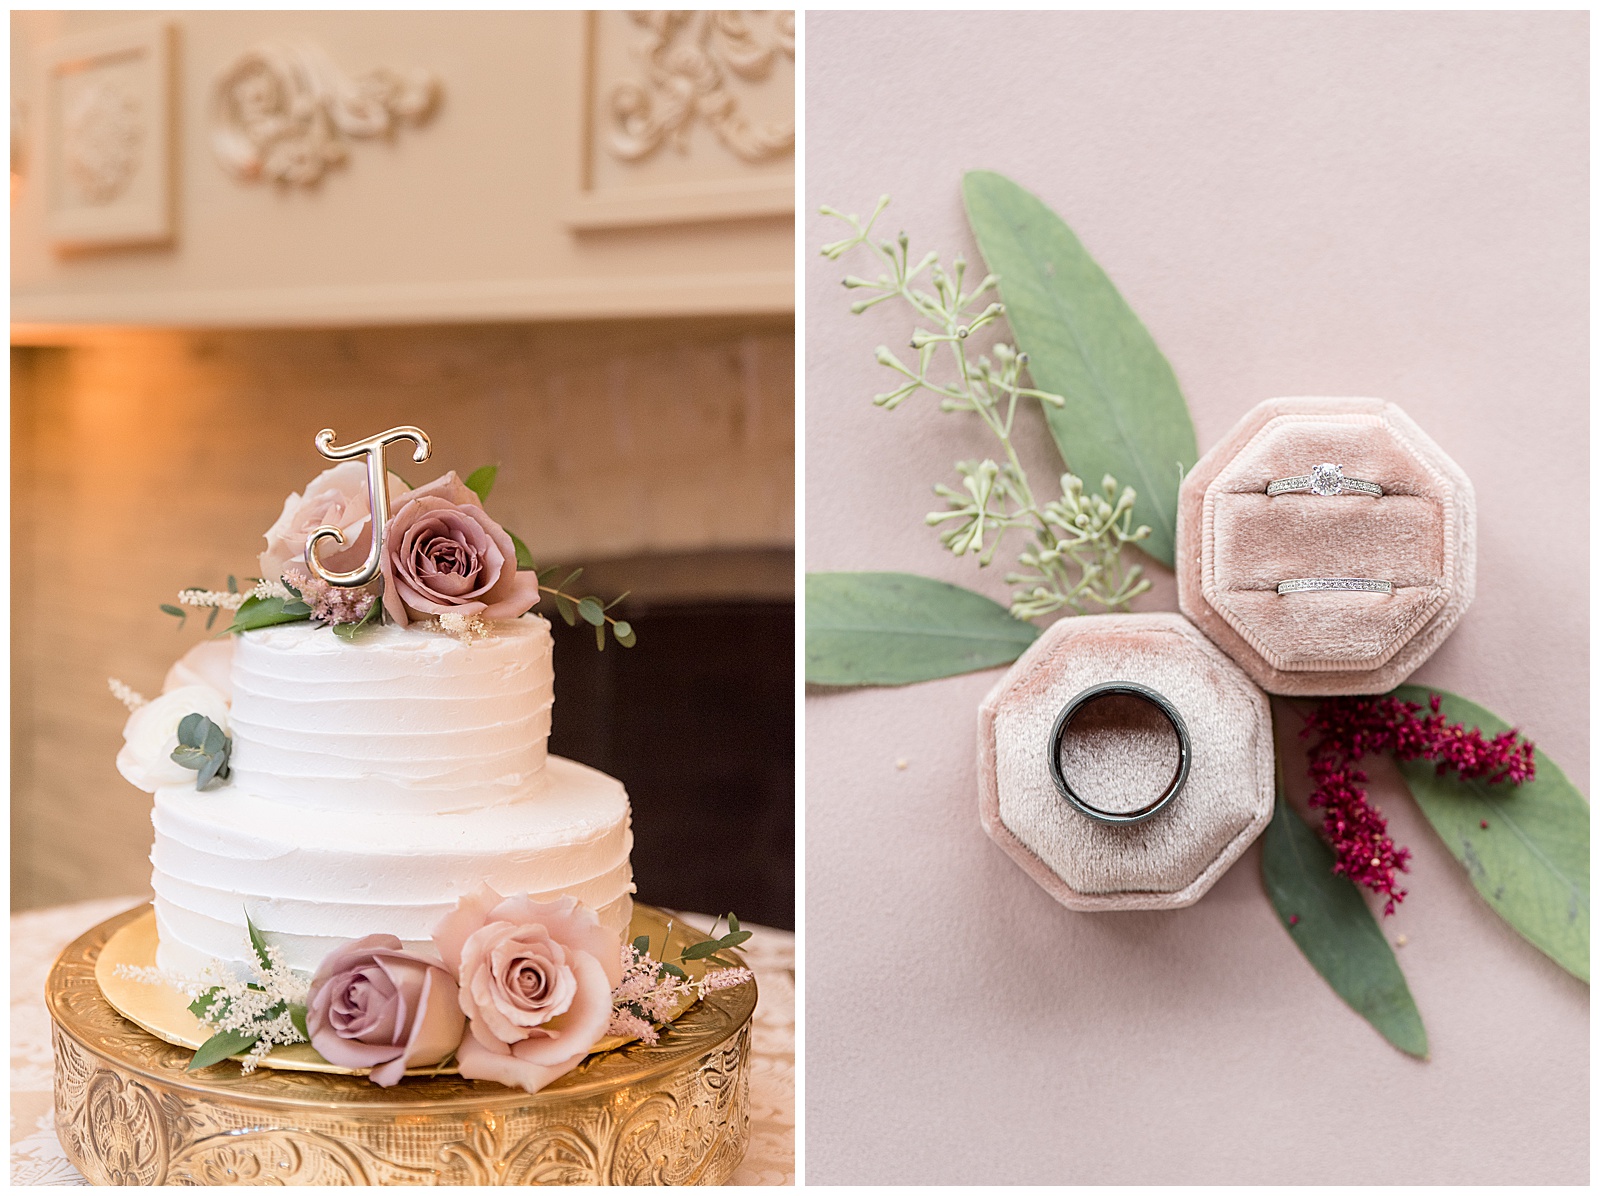 beautiful wedding cake with two layers and covered in mauve and pink roses